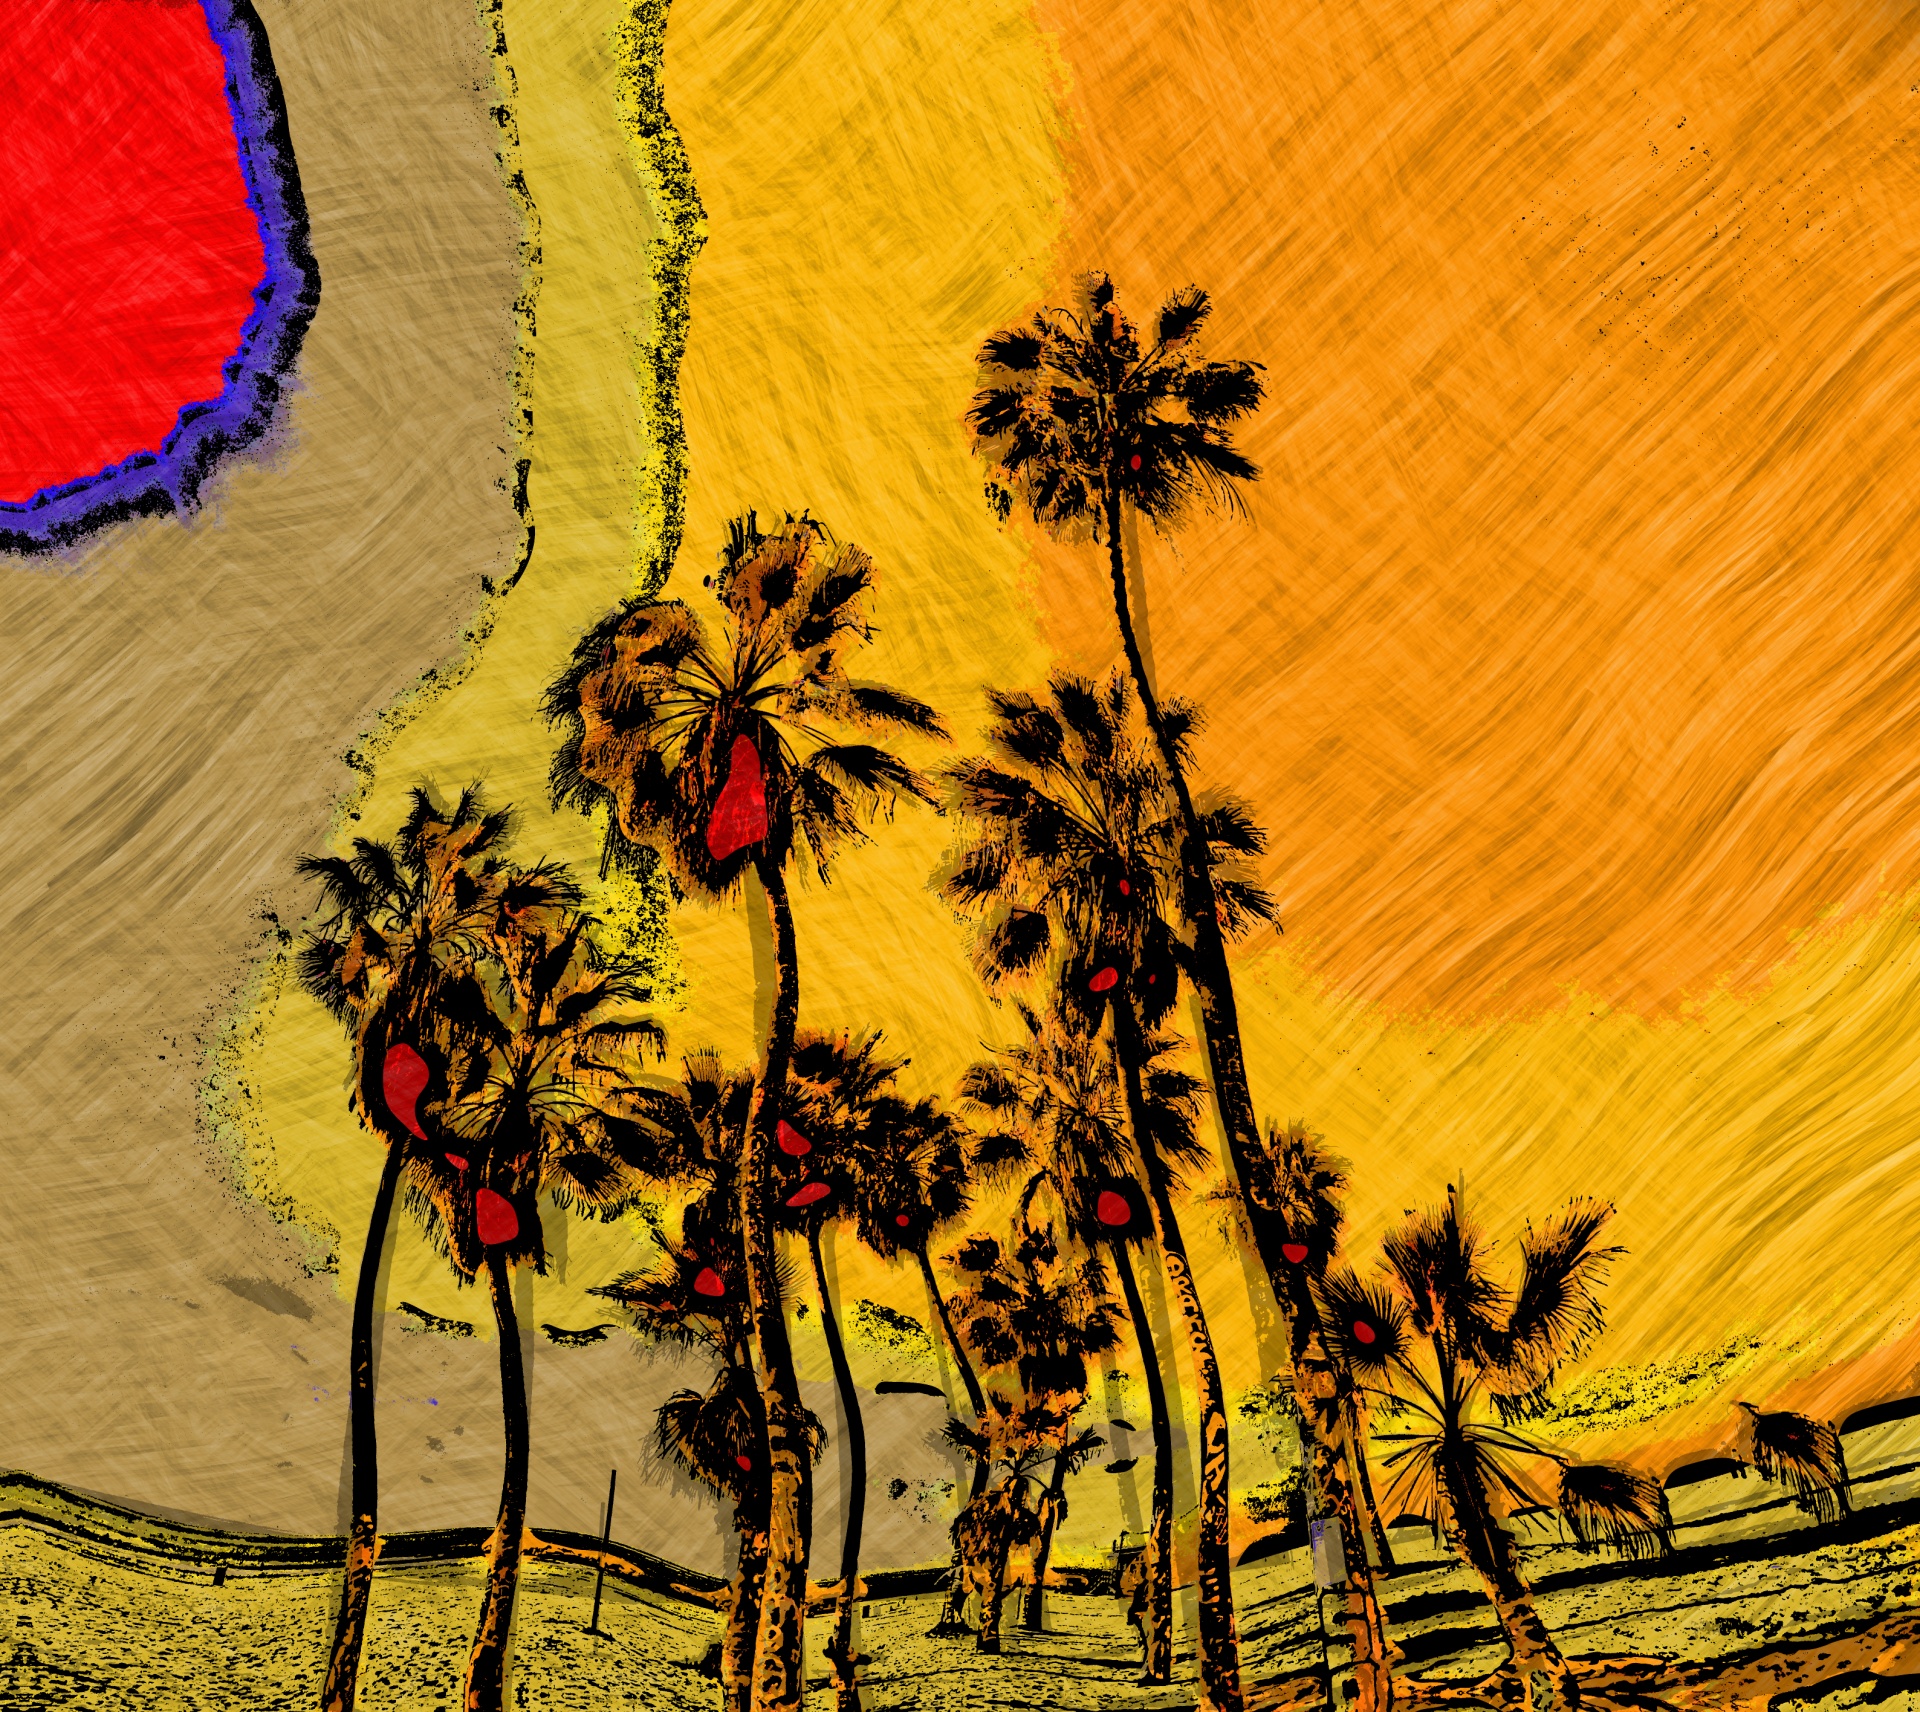 artistic rendering of palm trees - picasso style - red, gold